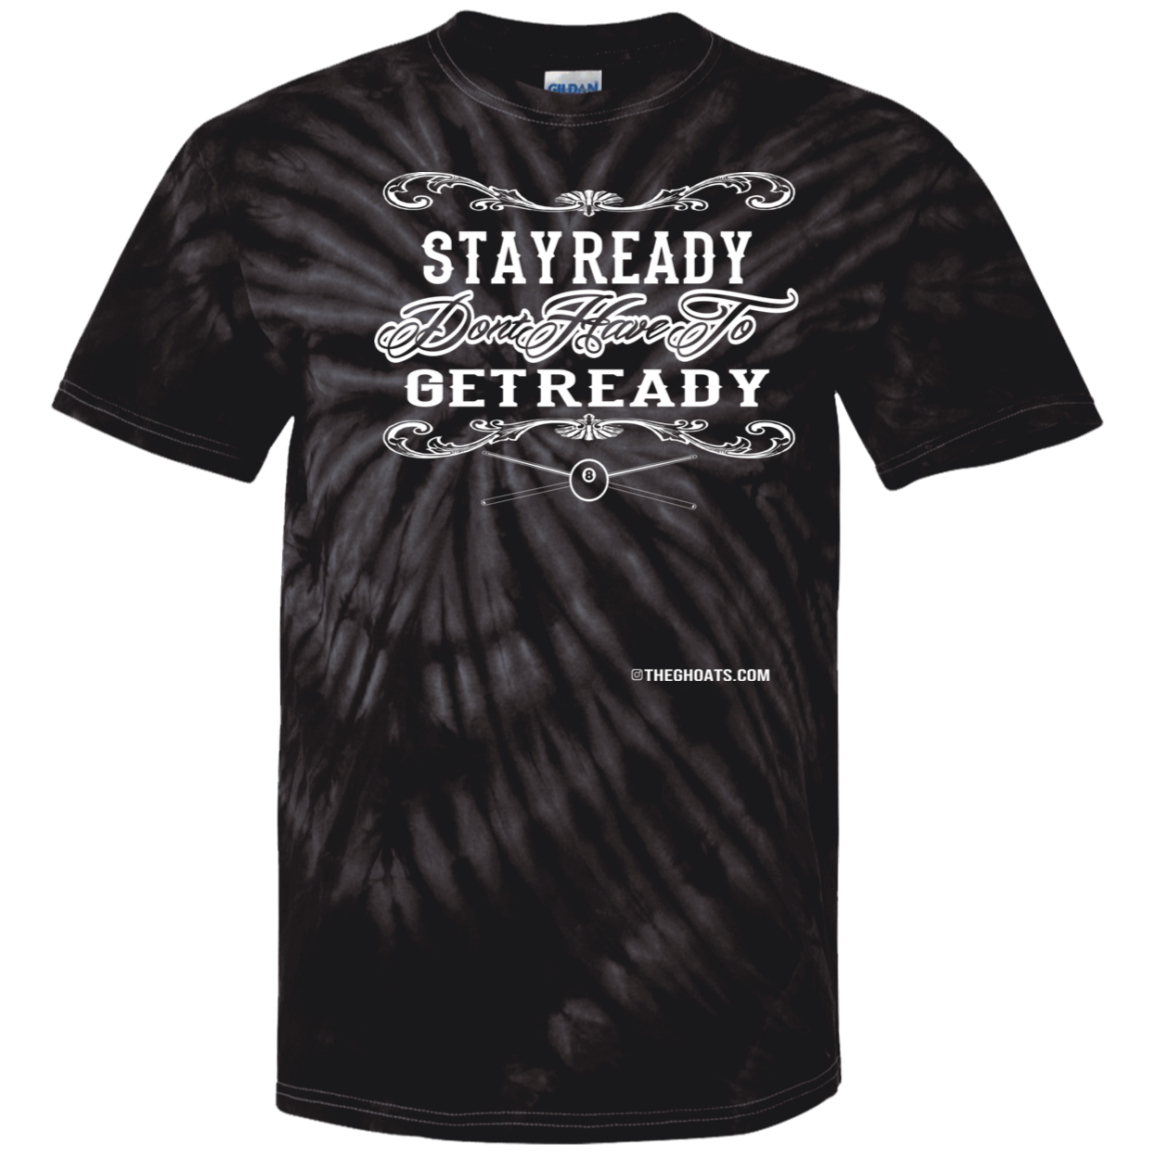 The GHOATS Custom Design #36. Stay Ready Don't Have to Get Ready. Ver 2/2. Youth Tie Dye T-Shirt